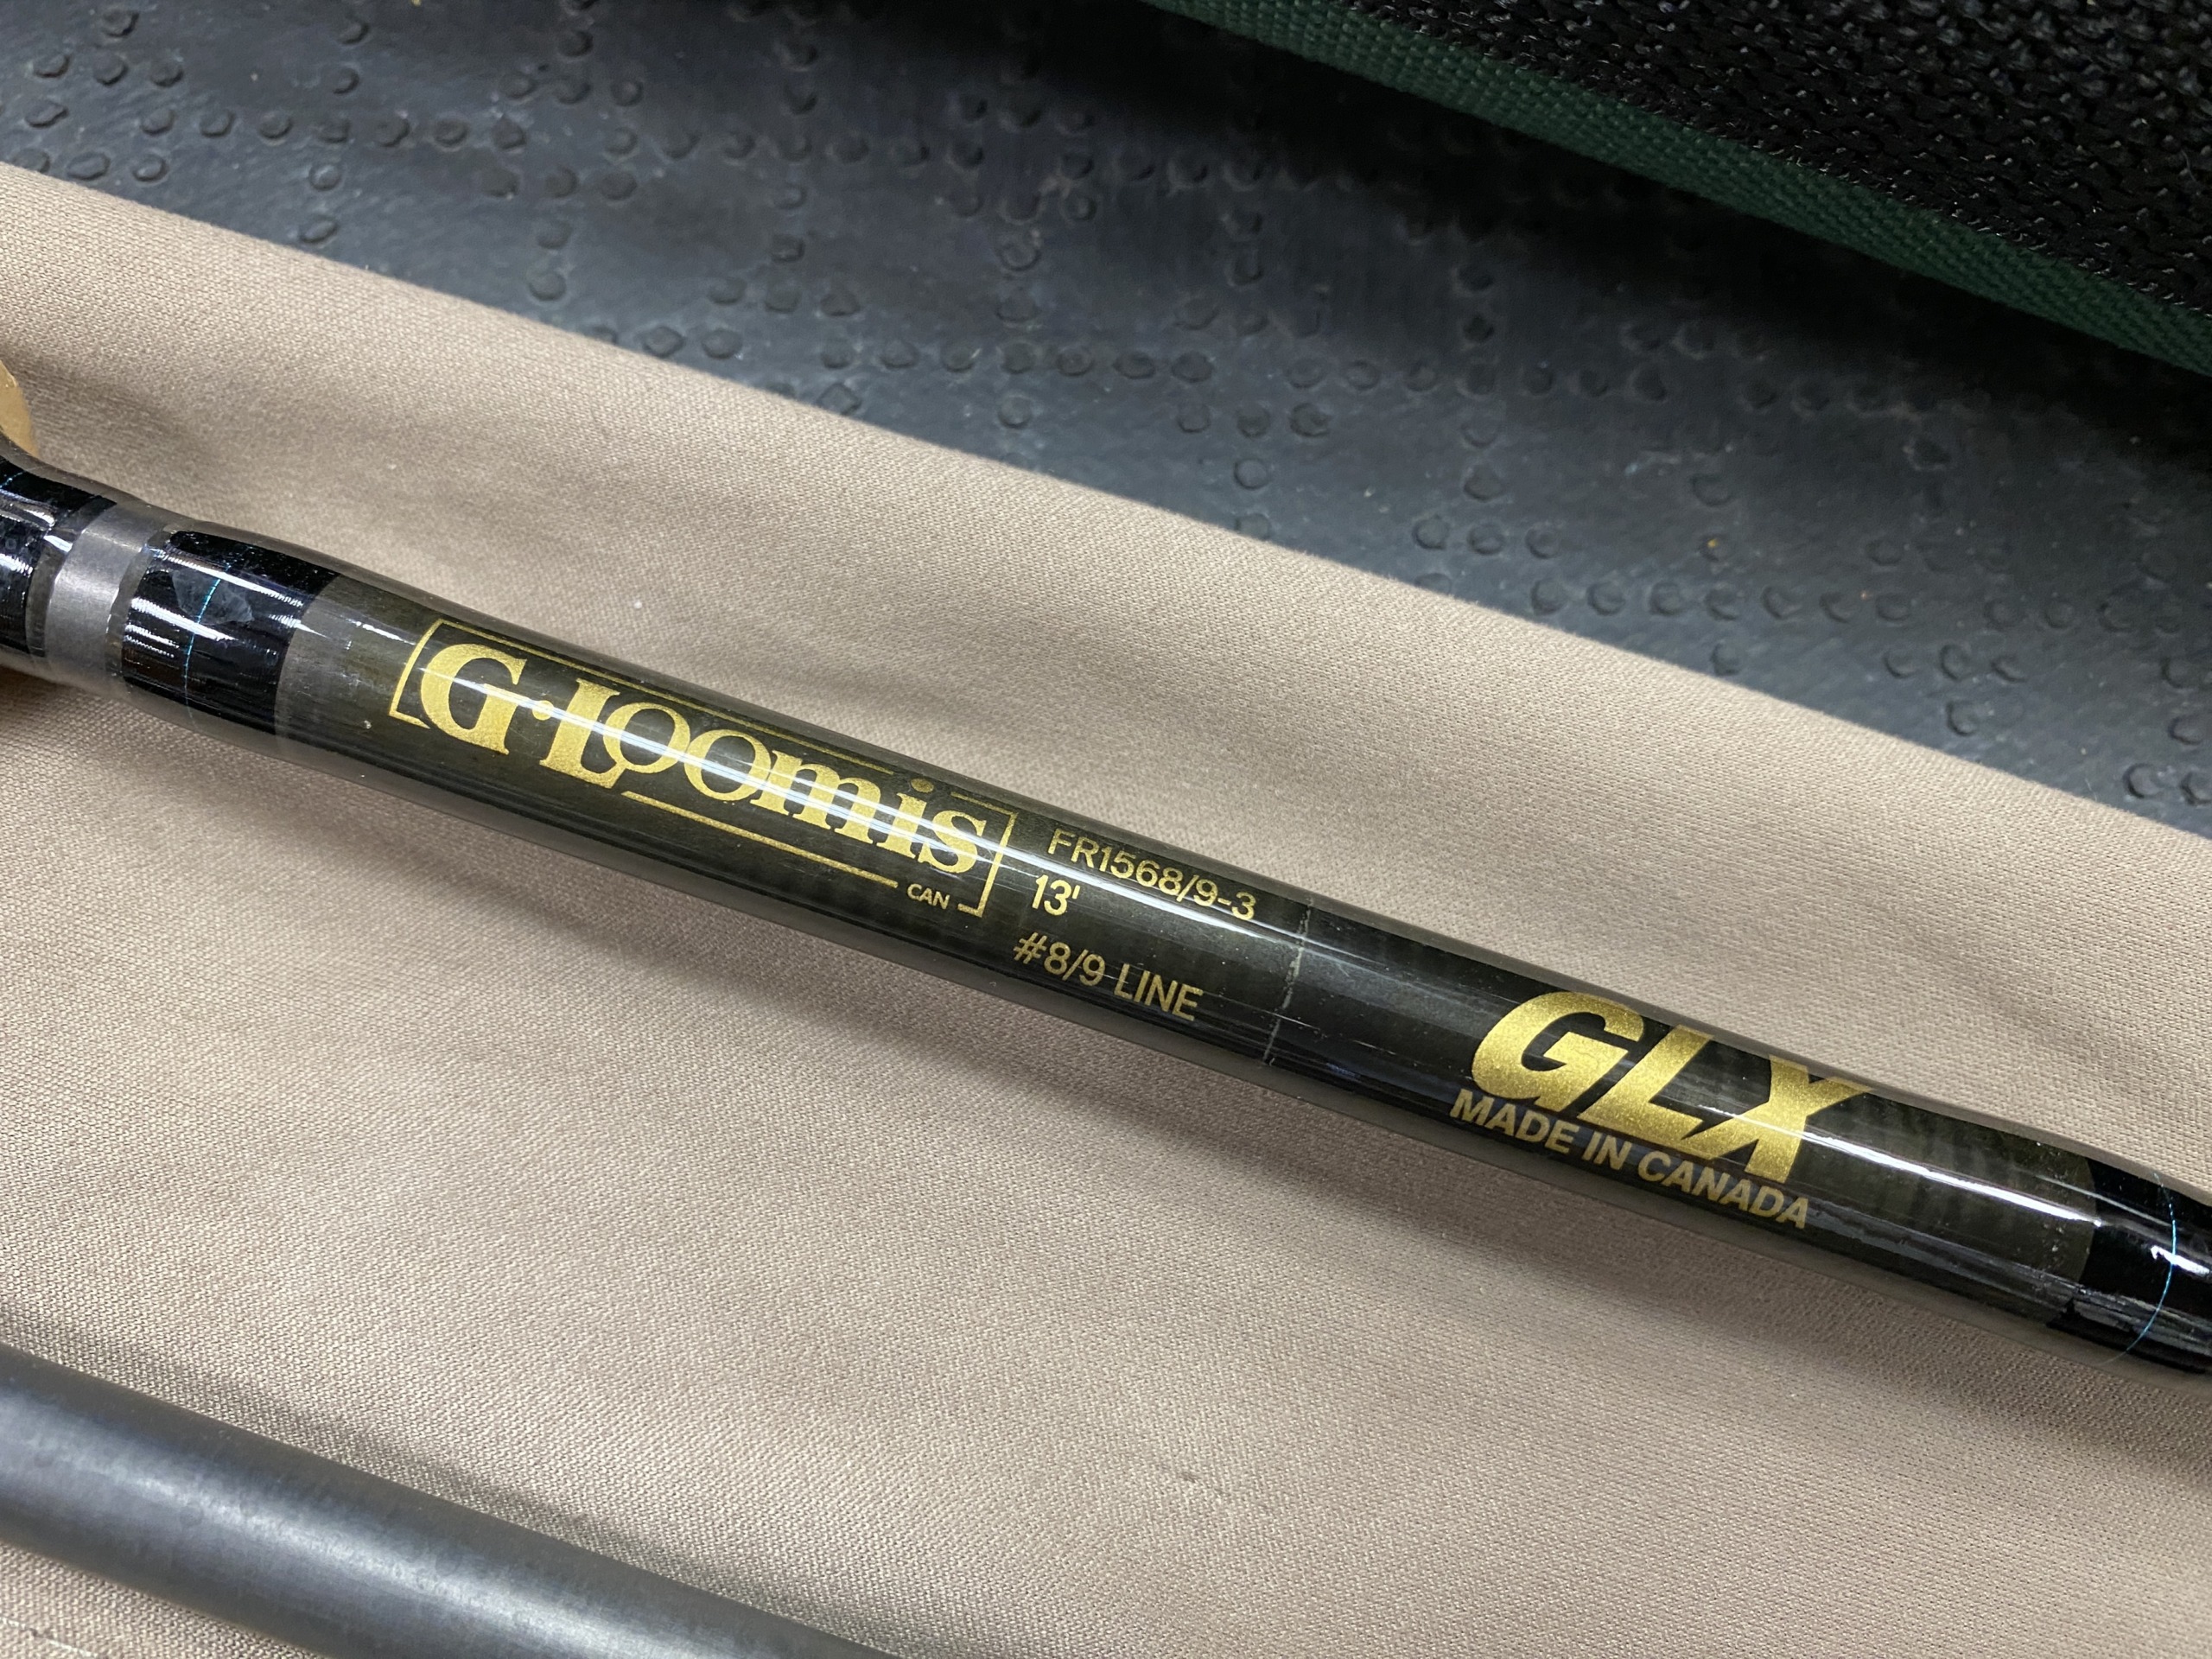 G. Loomis - GLX FR1568/9-3 Spey Rod - 13' - 8/9WT - 3Pc - Made in Canada - C/W TWO TIPS & Tube - GREAT SHAPE! - $400